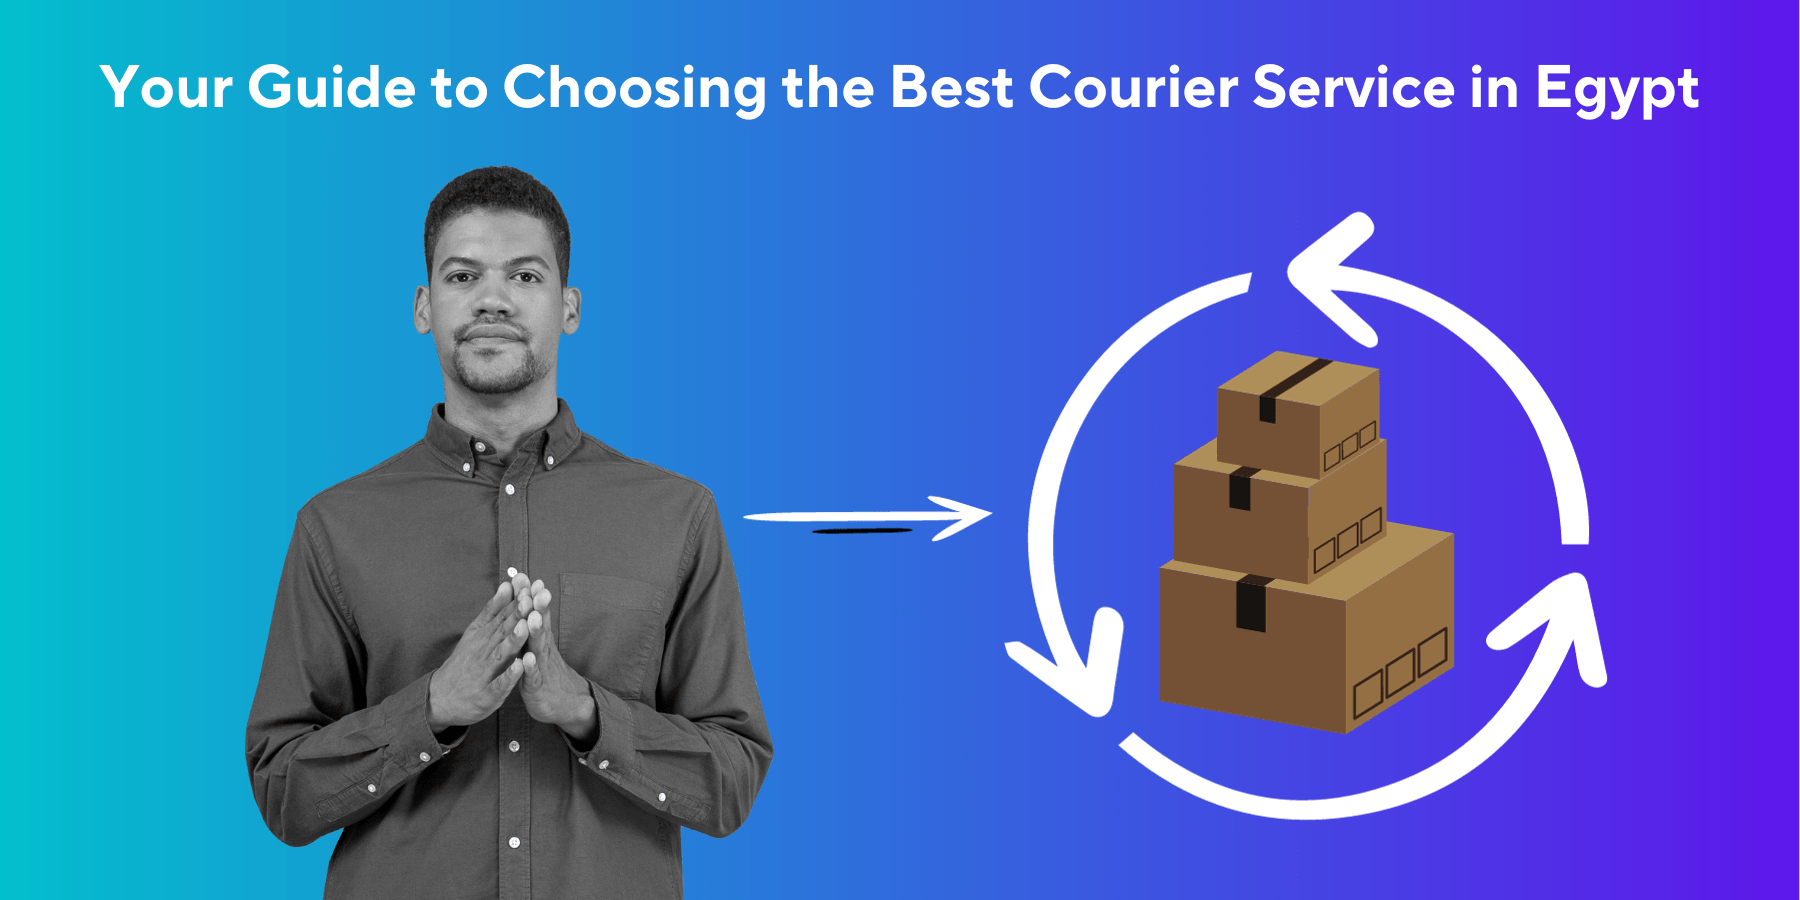 a man who is about to explain a guide for choosing the best courier service in Egypt